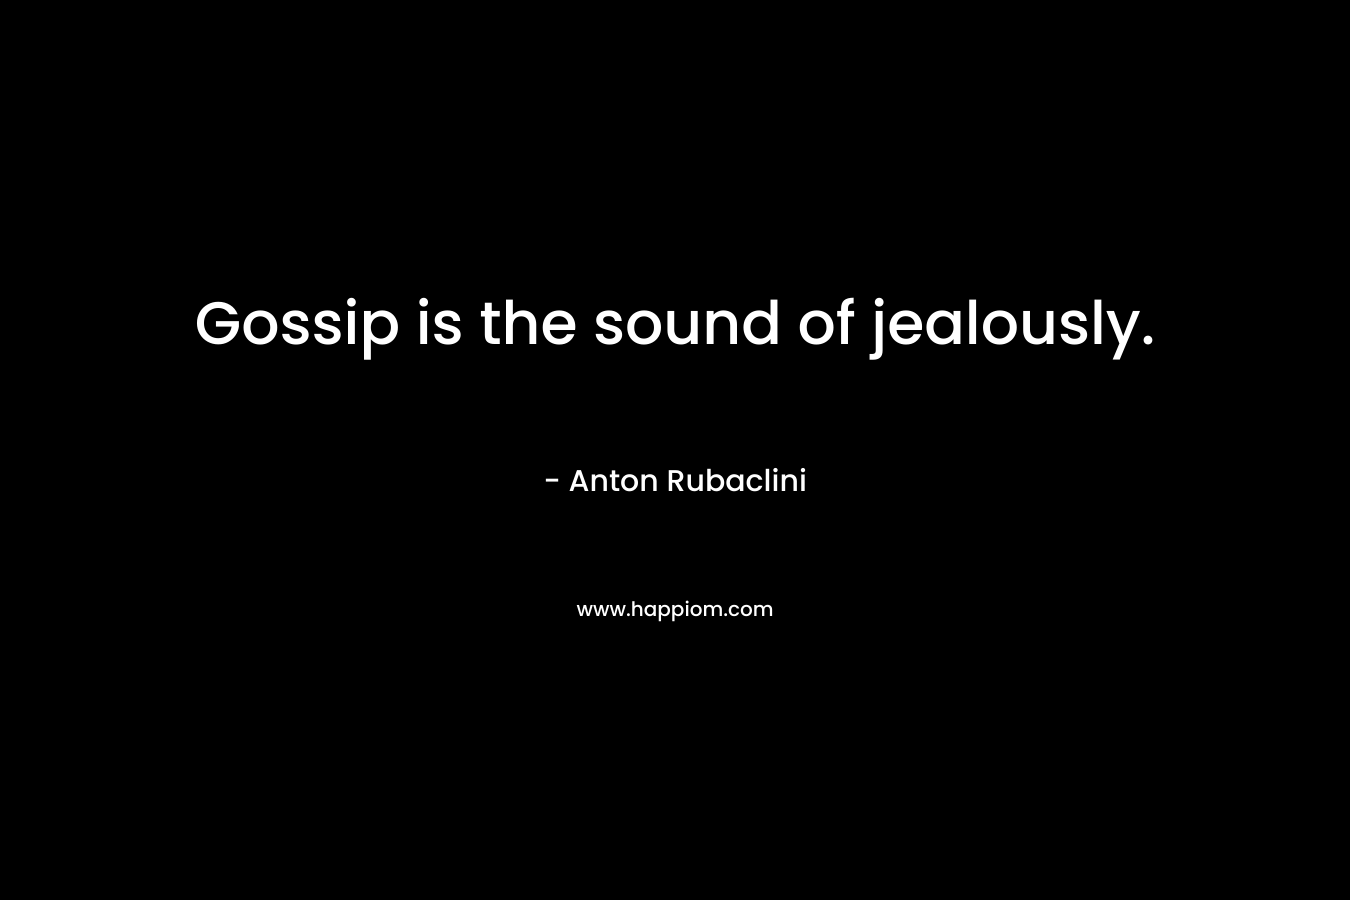 Gossip is the sound of jealously.